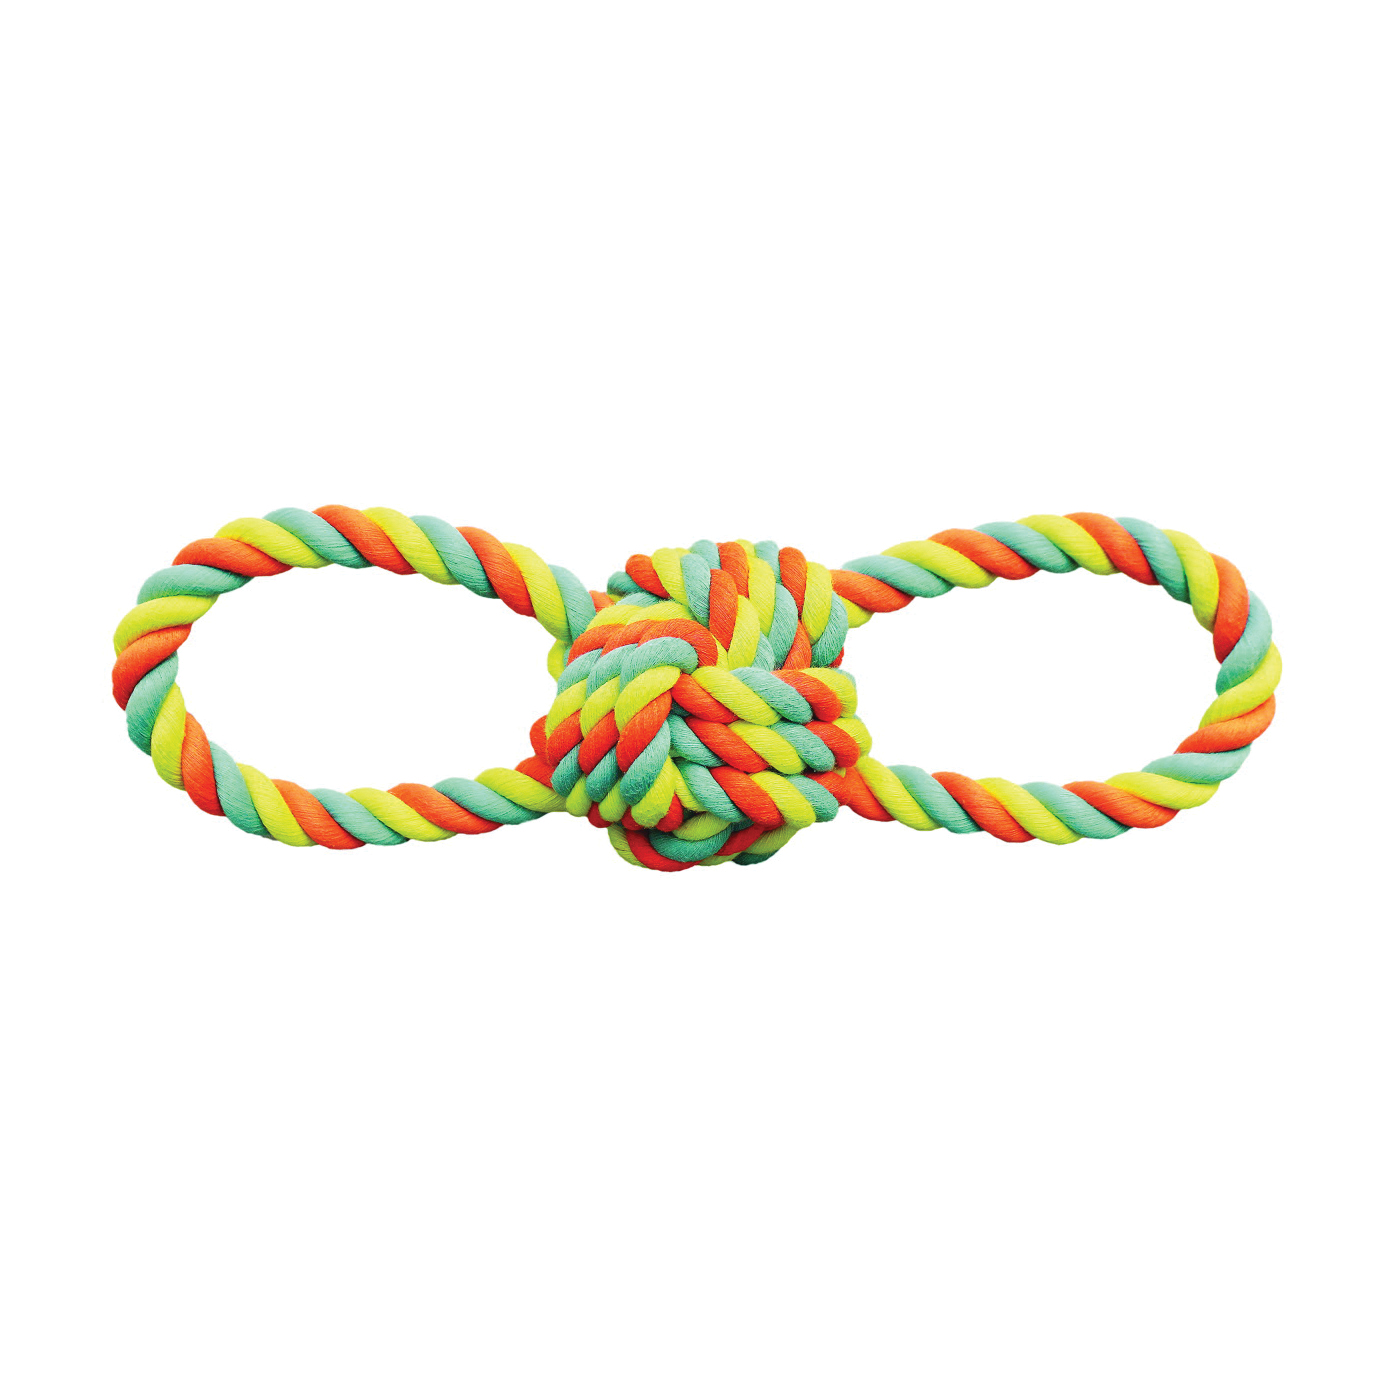 WB15522 Dog Toy, Rope Ball